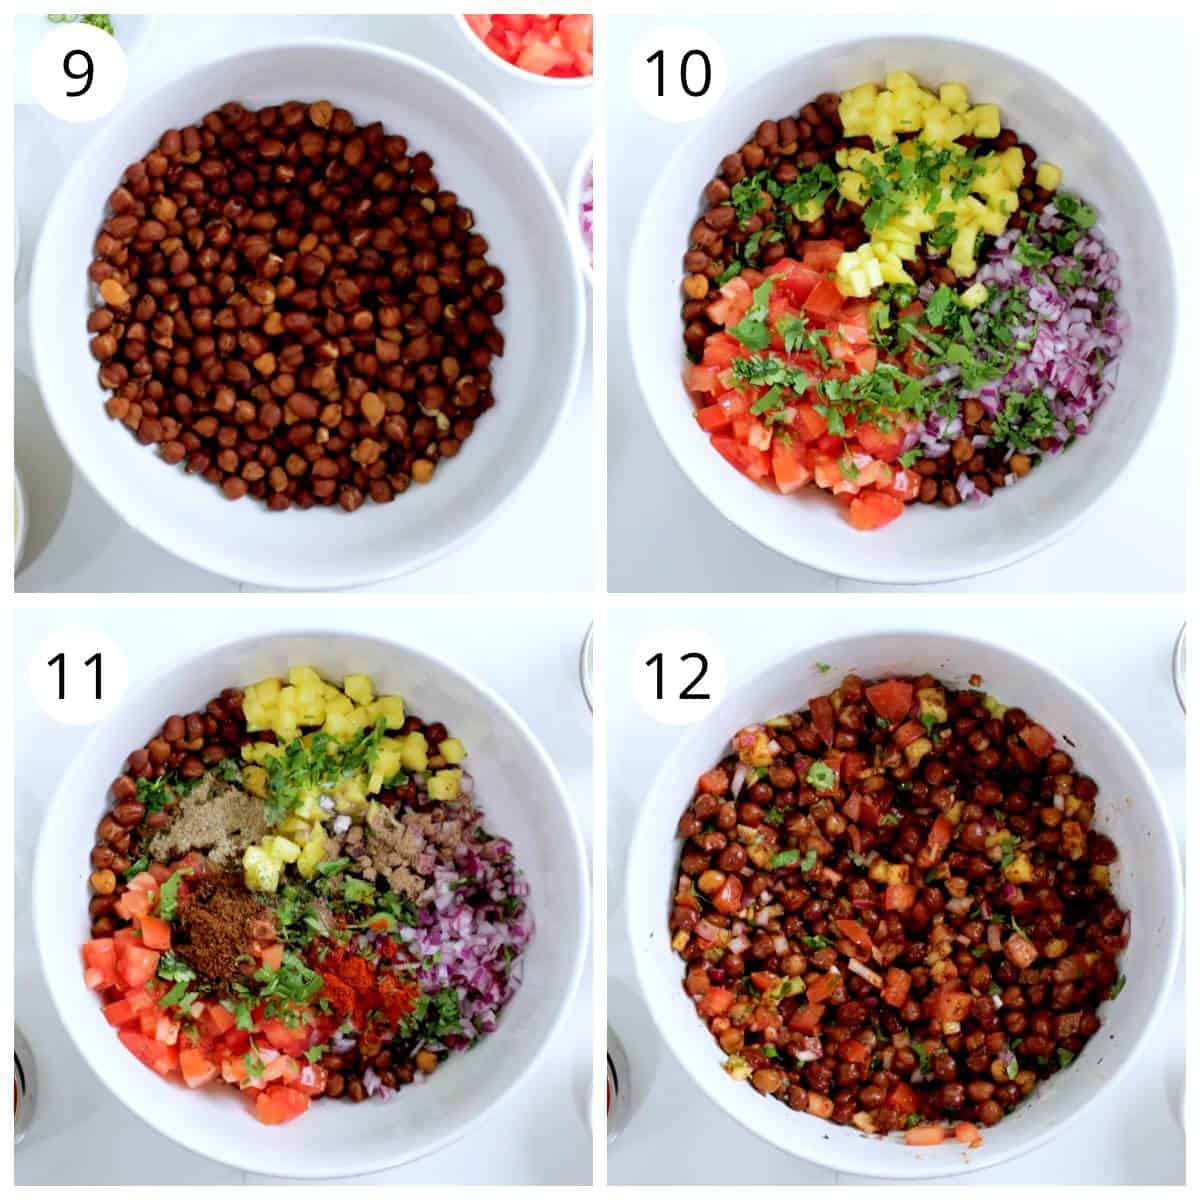 steps for mixing all ingredients in a bowl to make kala chana chaat (salad)